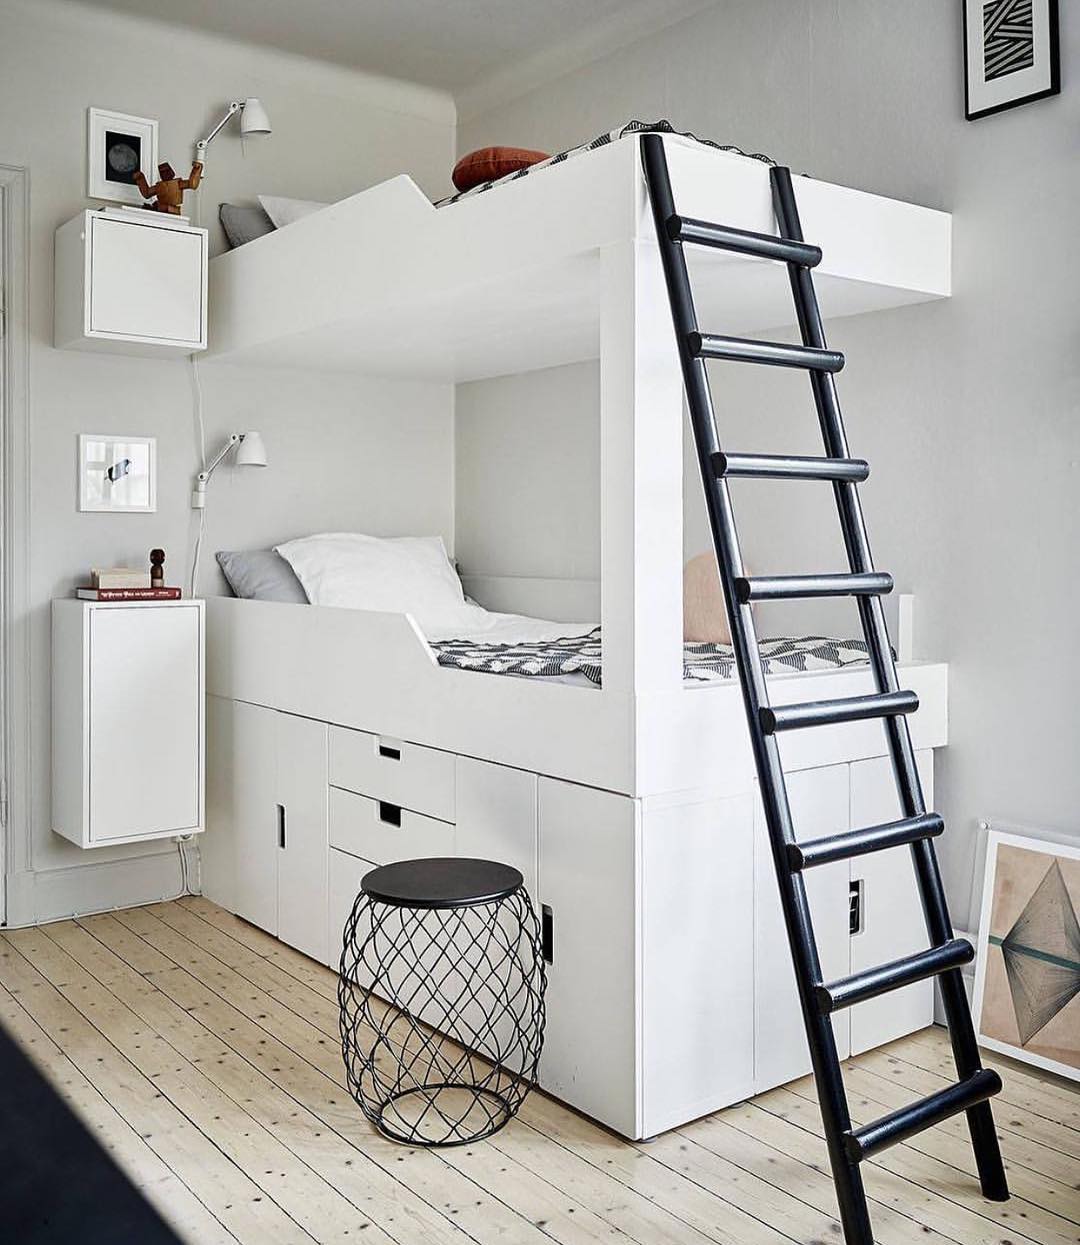 24 Ideas For Designing Shared Kids Rooms Extra Space Storage